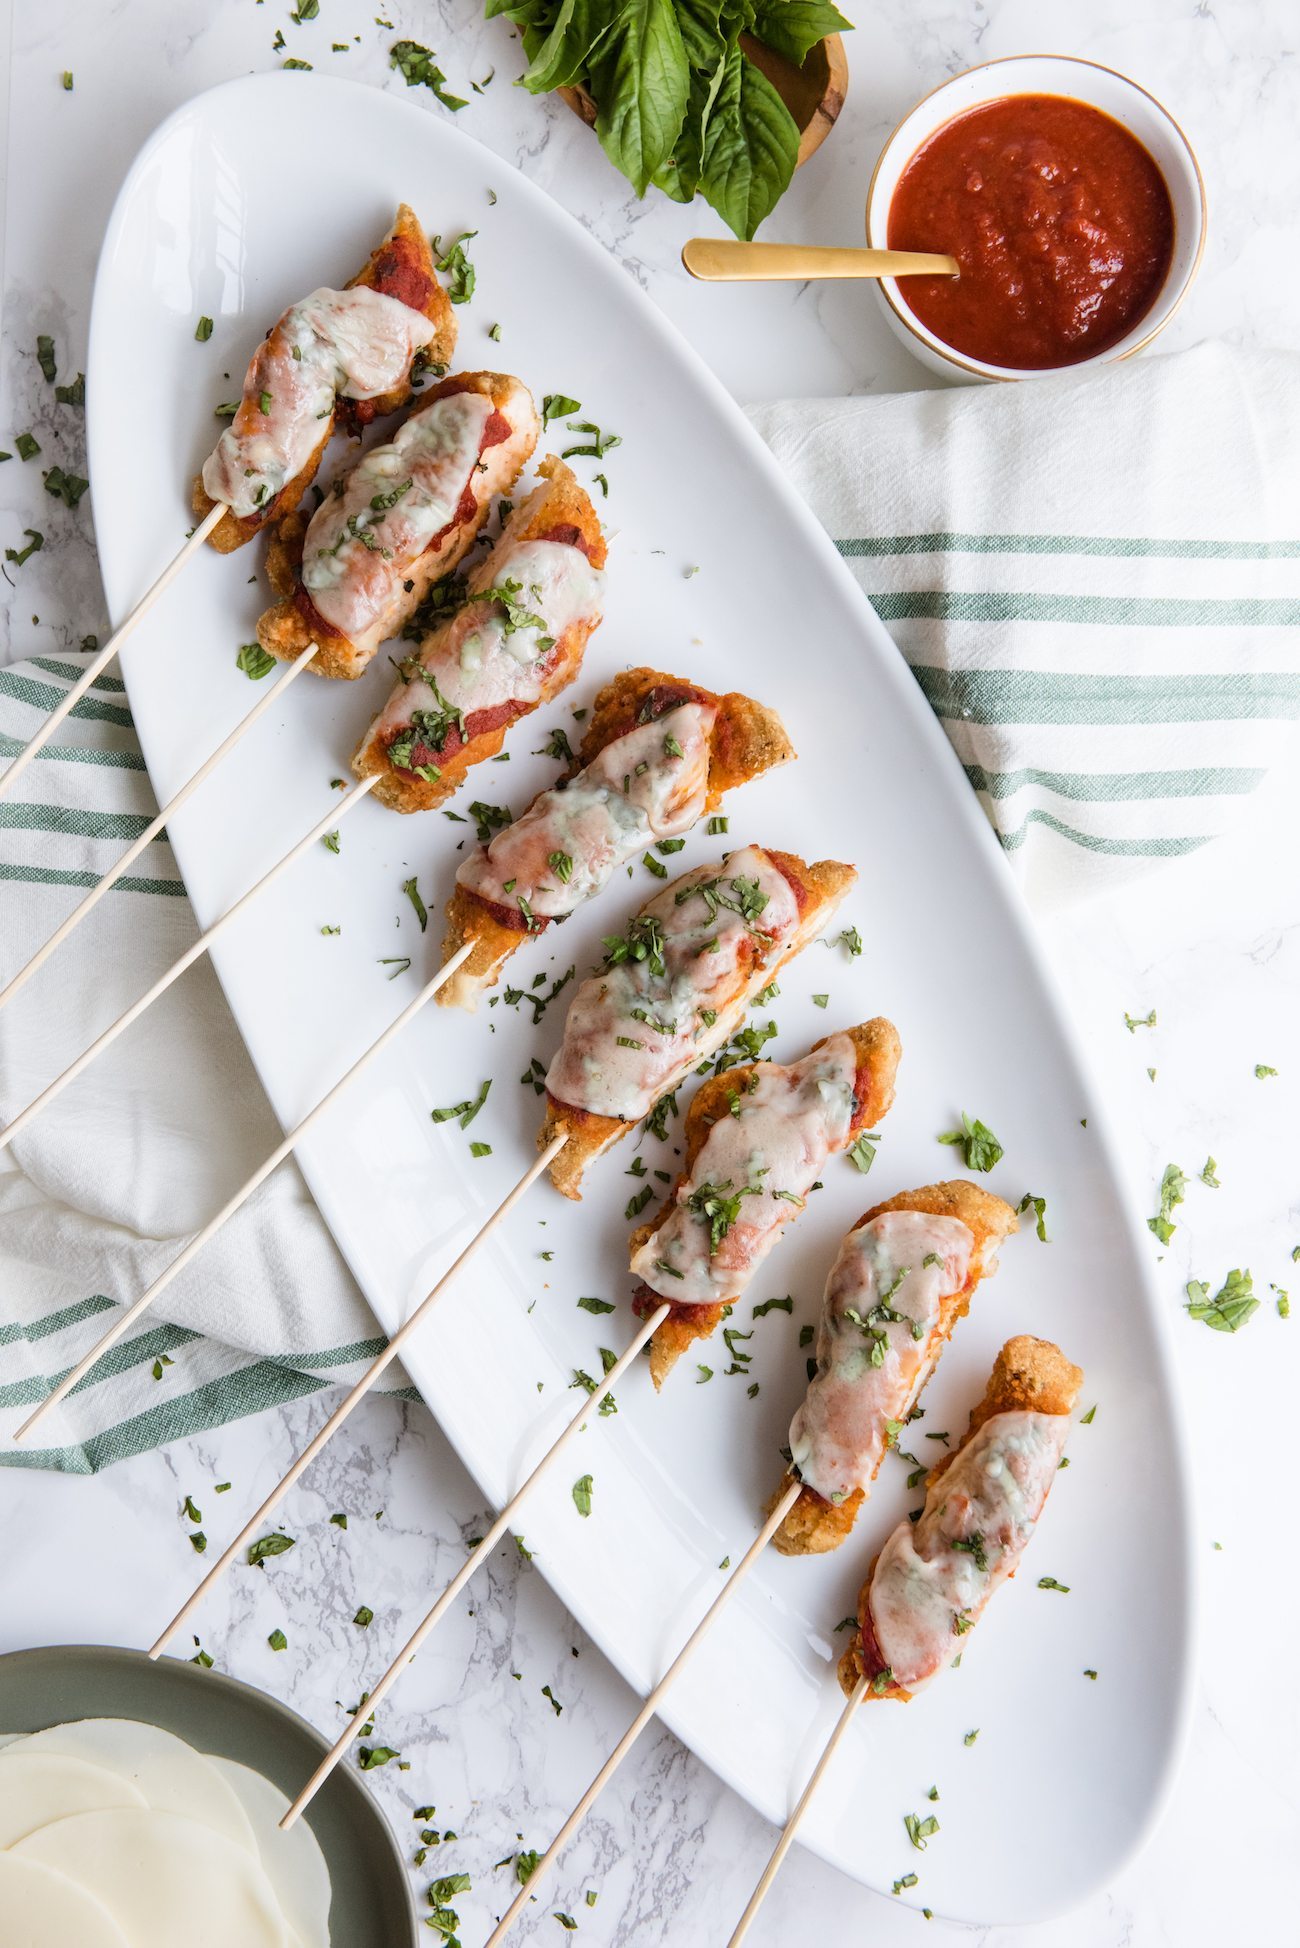 Last Minute Entertaining | Mini chicken parm on a stick from @cydconverse